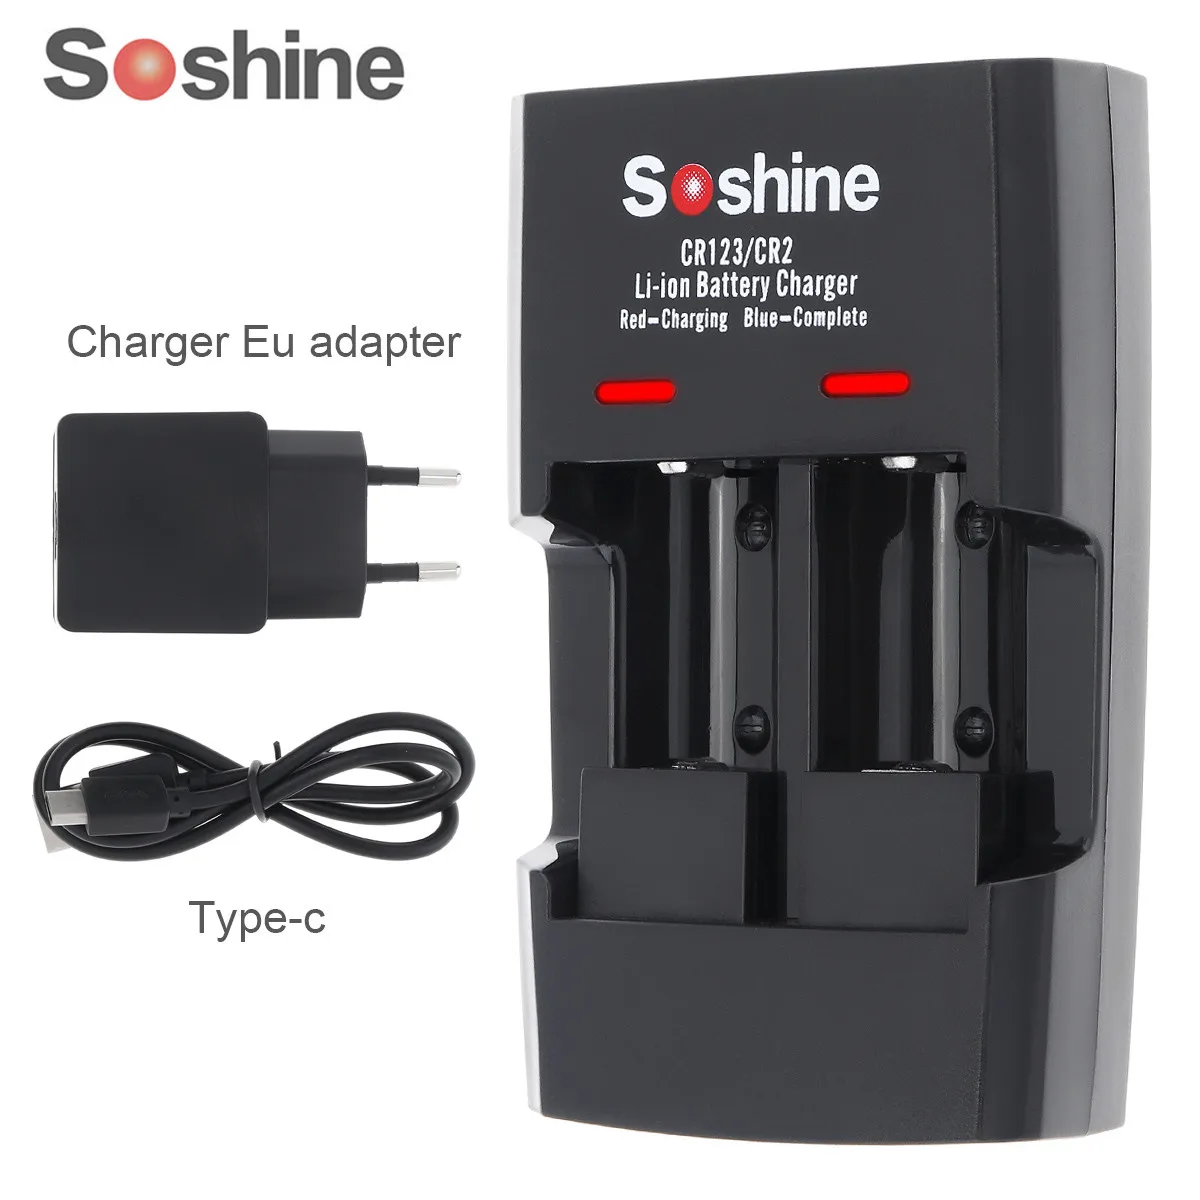 

Soshine 2 Slots RCR123 CR123 CR2 Rapid Smart Li-ion Battery Charger with LED Indicator for 14250 CR2 16340 17335 15266 Battery